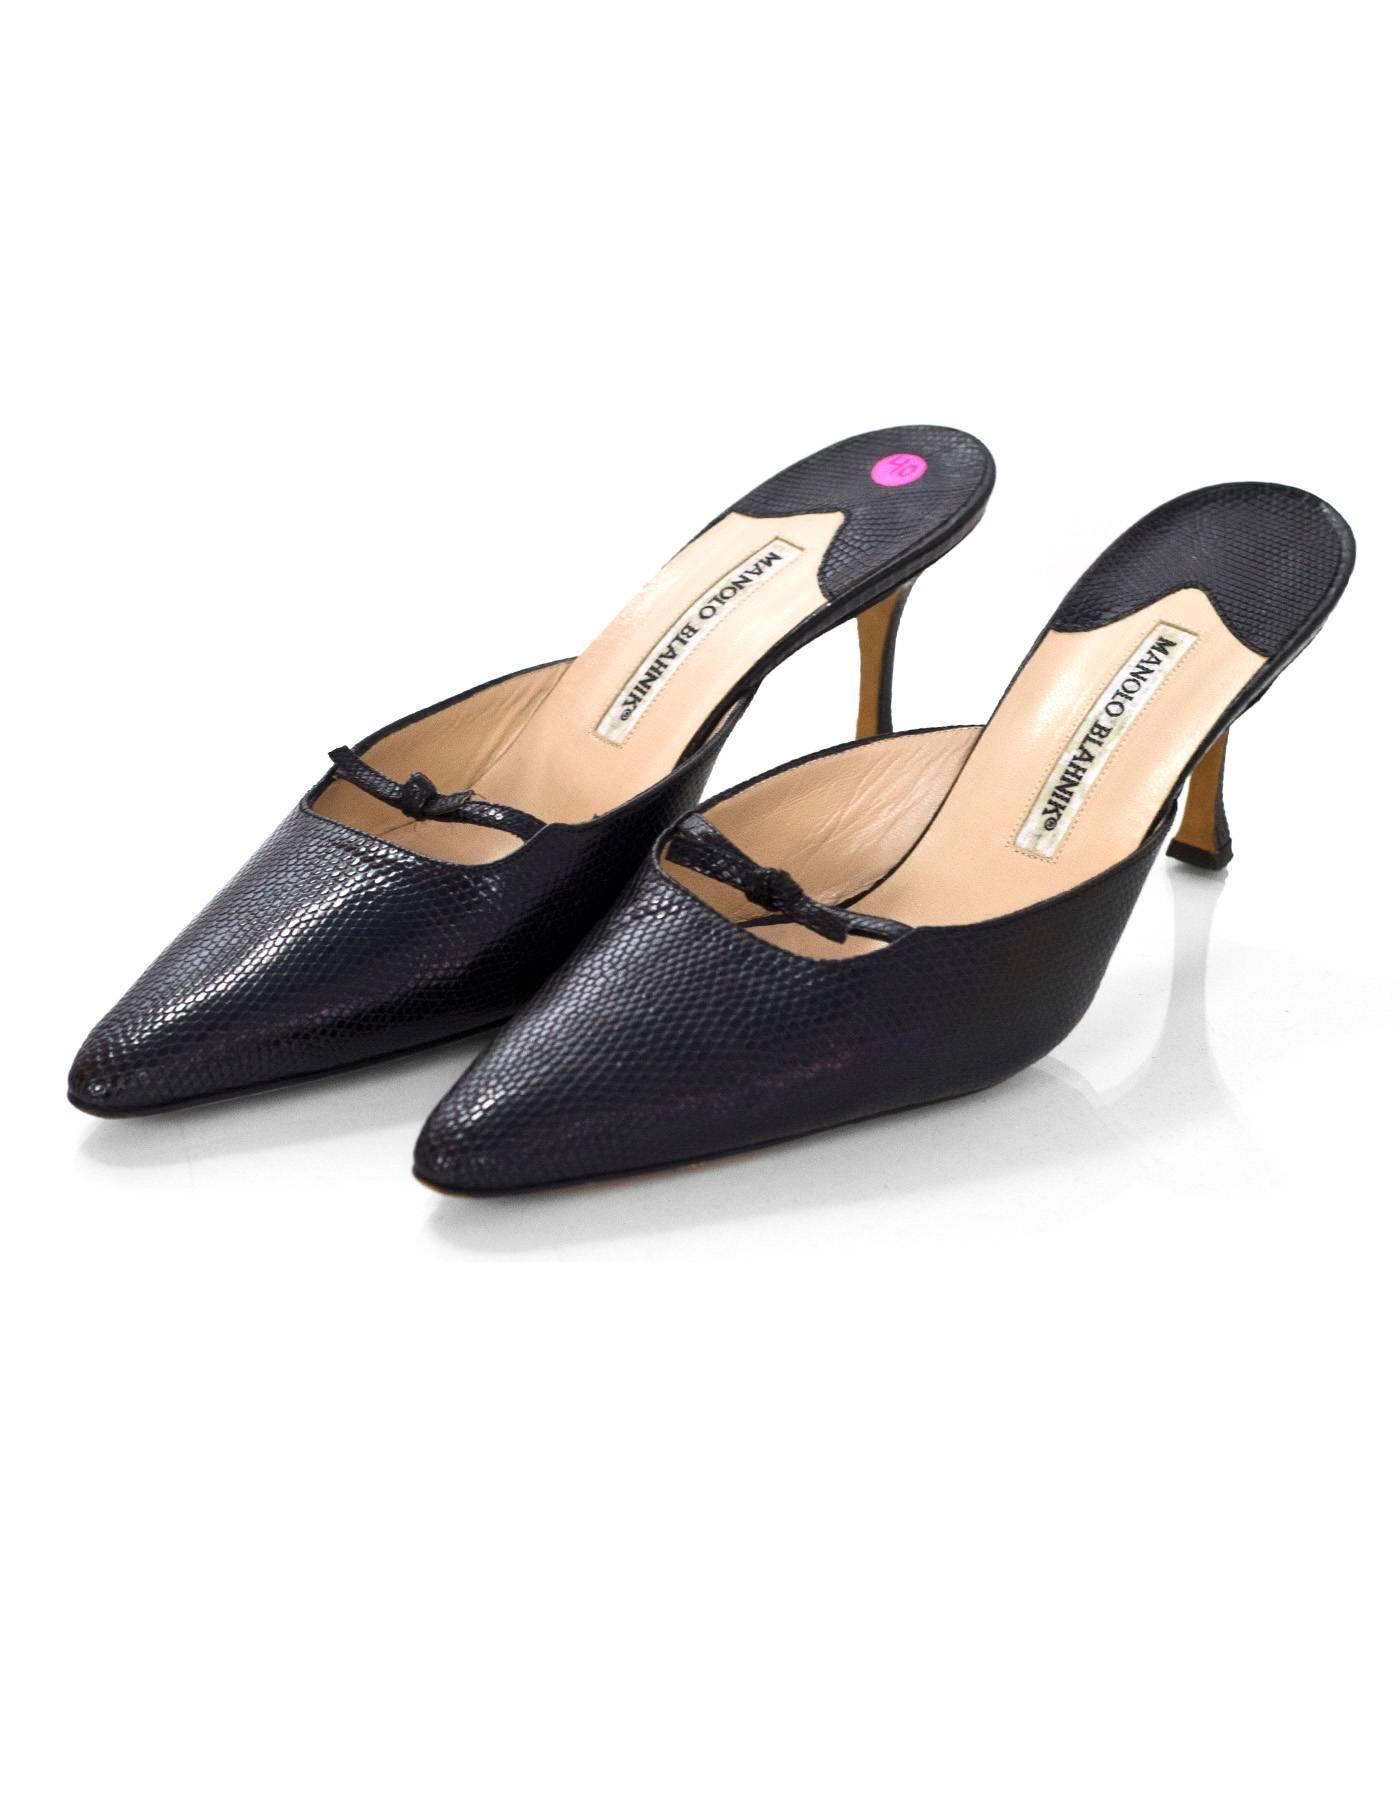 Manolo Blahnik Black Lizard Mules Sz 40

Made In: Italy
Color: Black
Materials: Lizard
Closure/Opening: Slide on
Sole Stamp: Manolo Blahnik mad3 in italy 40
Overall Condition: Excellent pre-owned condition with the exception of light wear at insoles